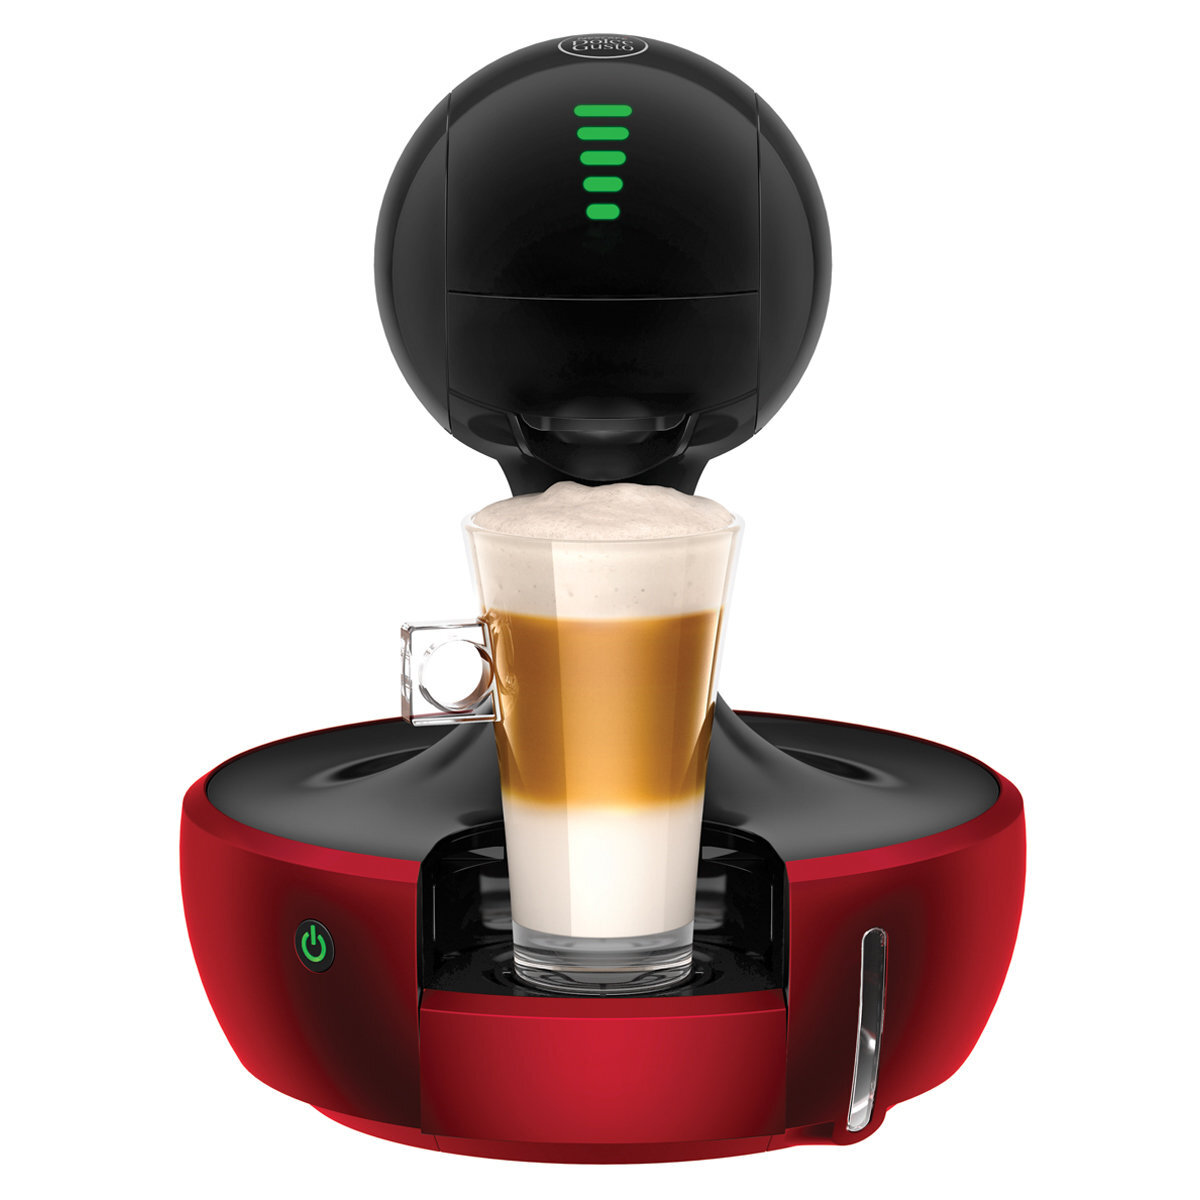 Dolce Gusto – My New Coffee Machine at Work